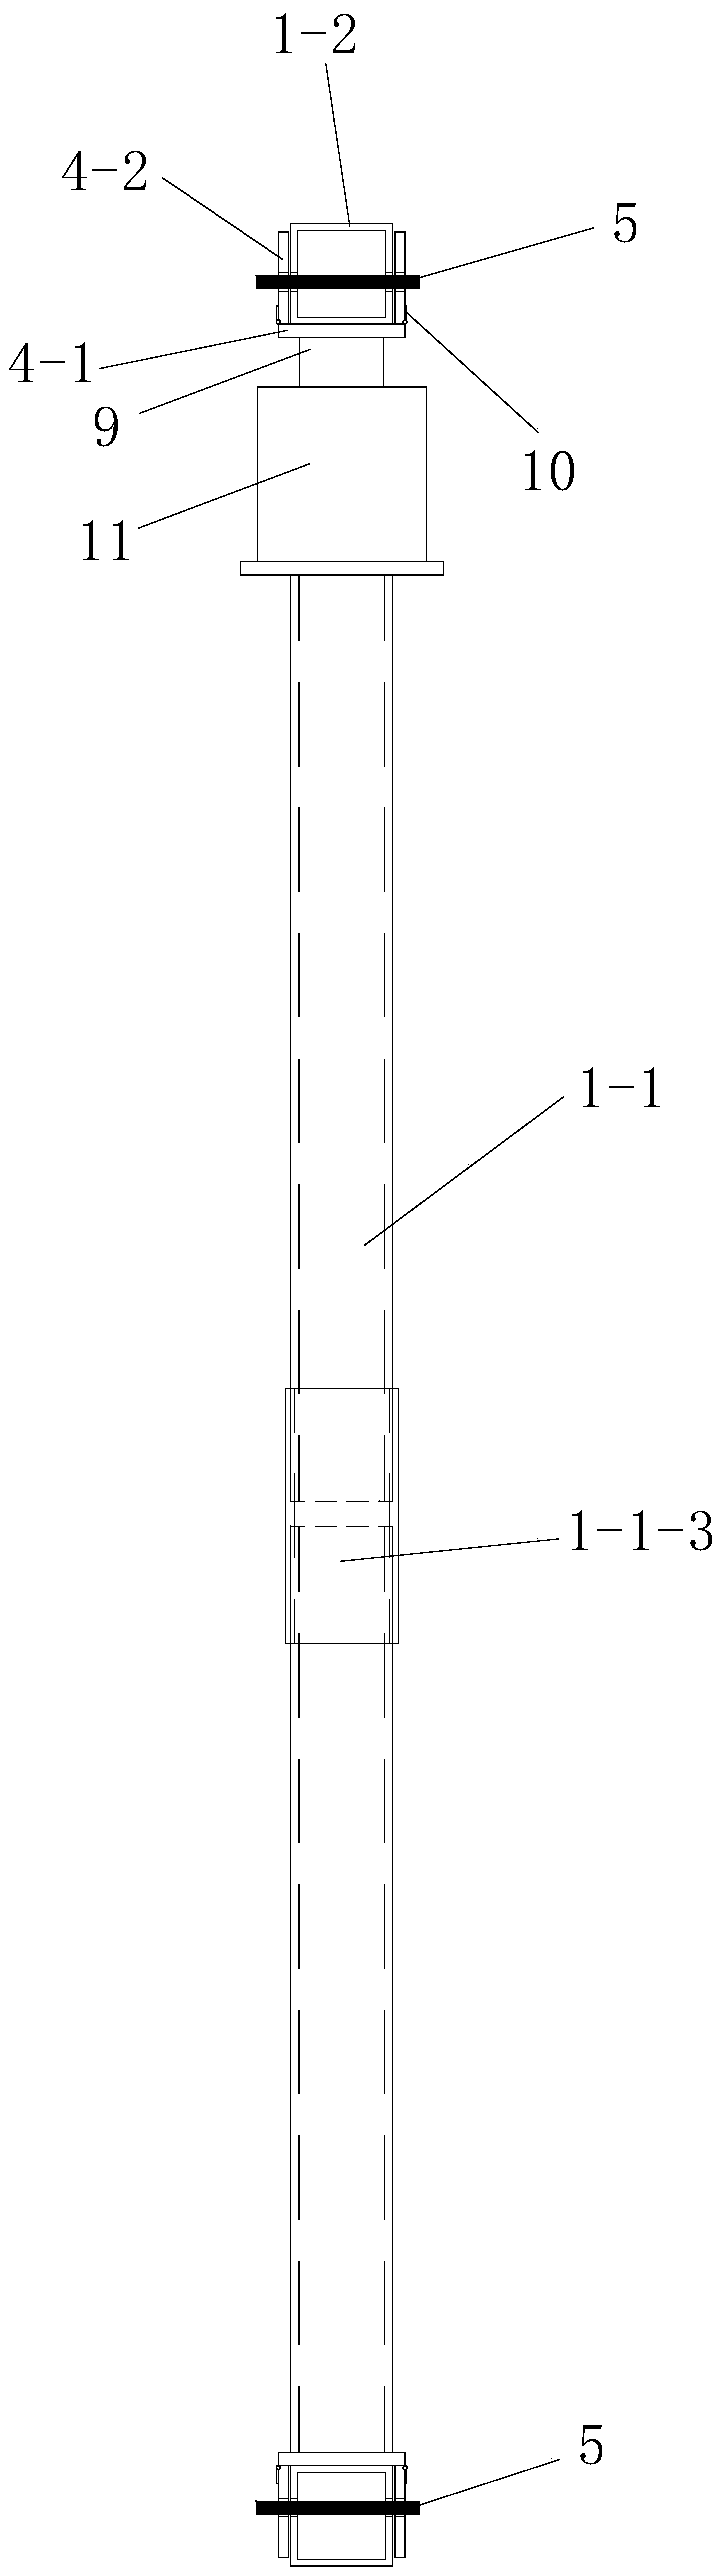 Hydraulic supporting method for concrete replacement of shear walls in high-rise building